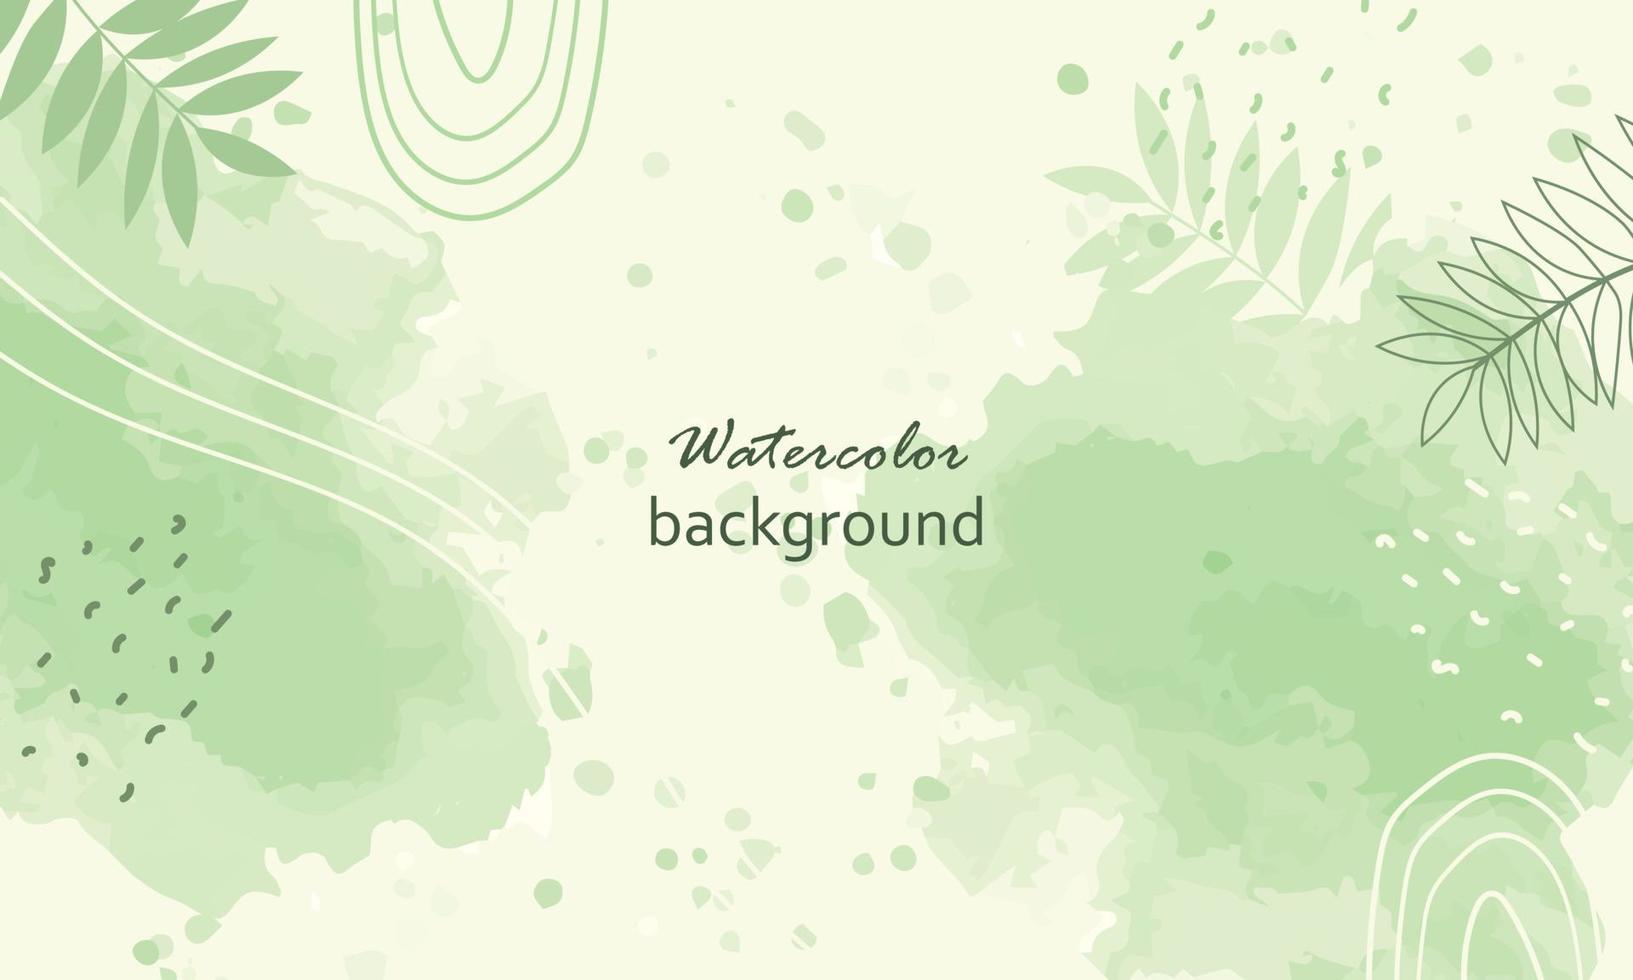 Watercolor Green Branch Frame With White Circle vector